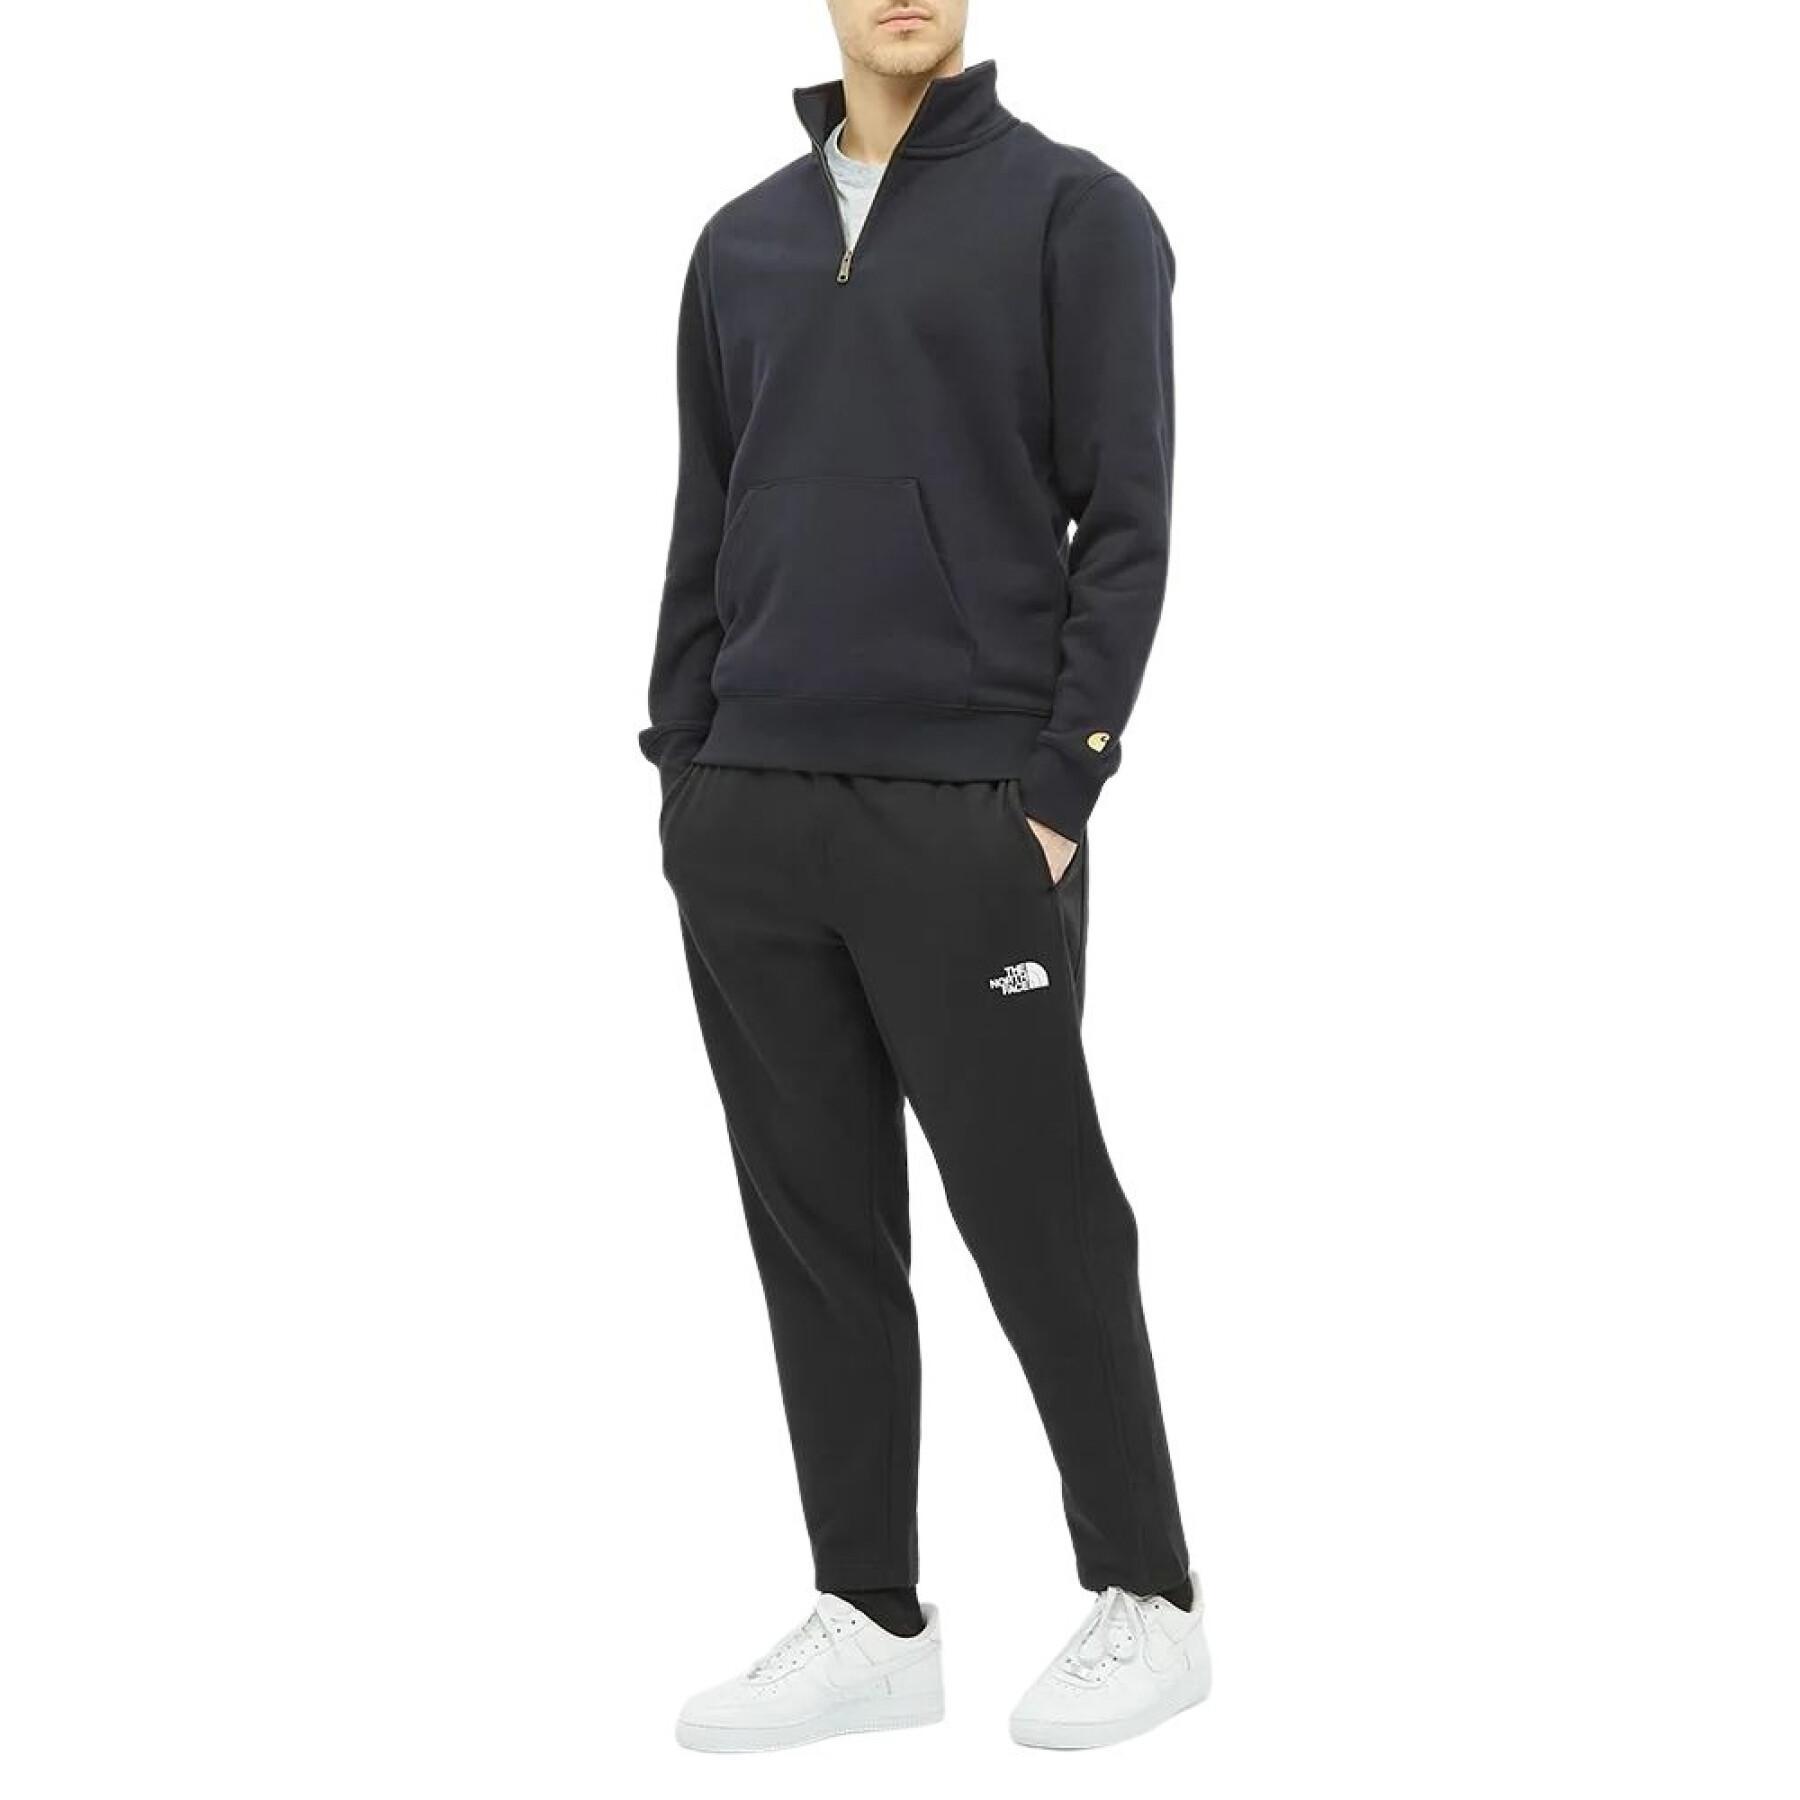 Pants The North Face Standard